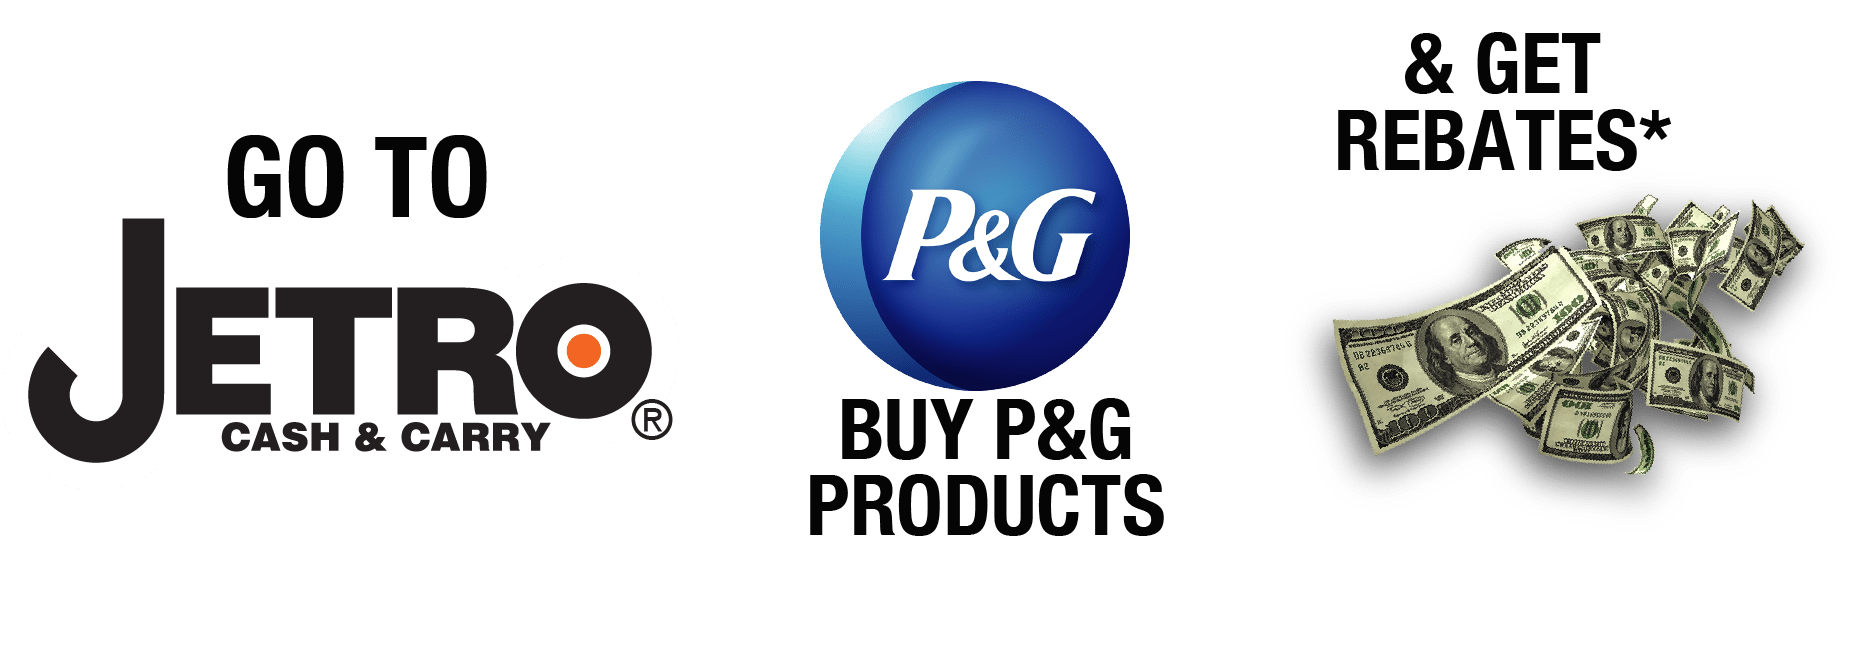 Jetro Logo - Jetro Special: Get a Rebate For P&G Purchases Made in Jetro